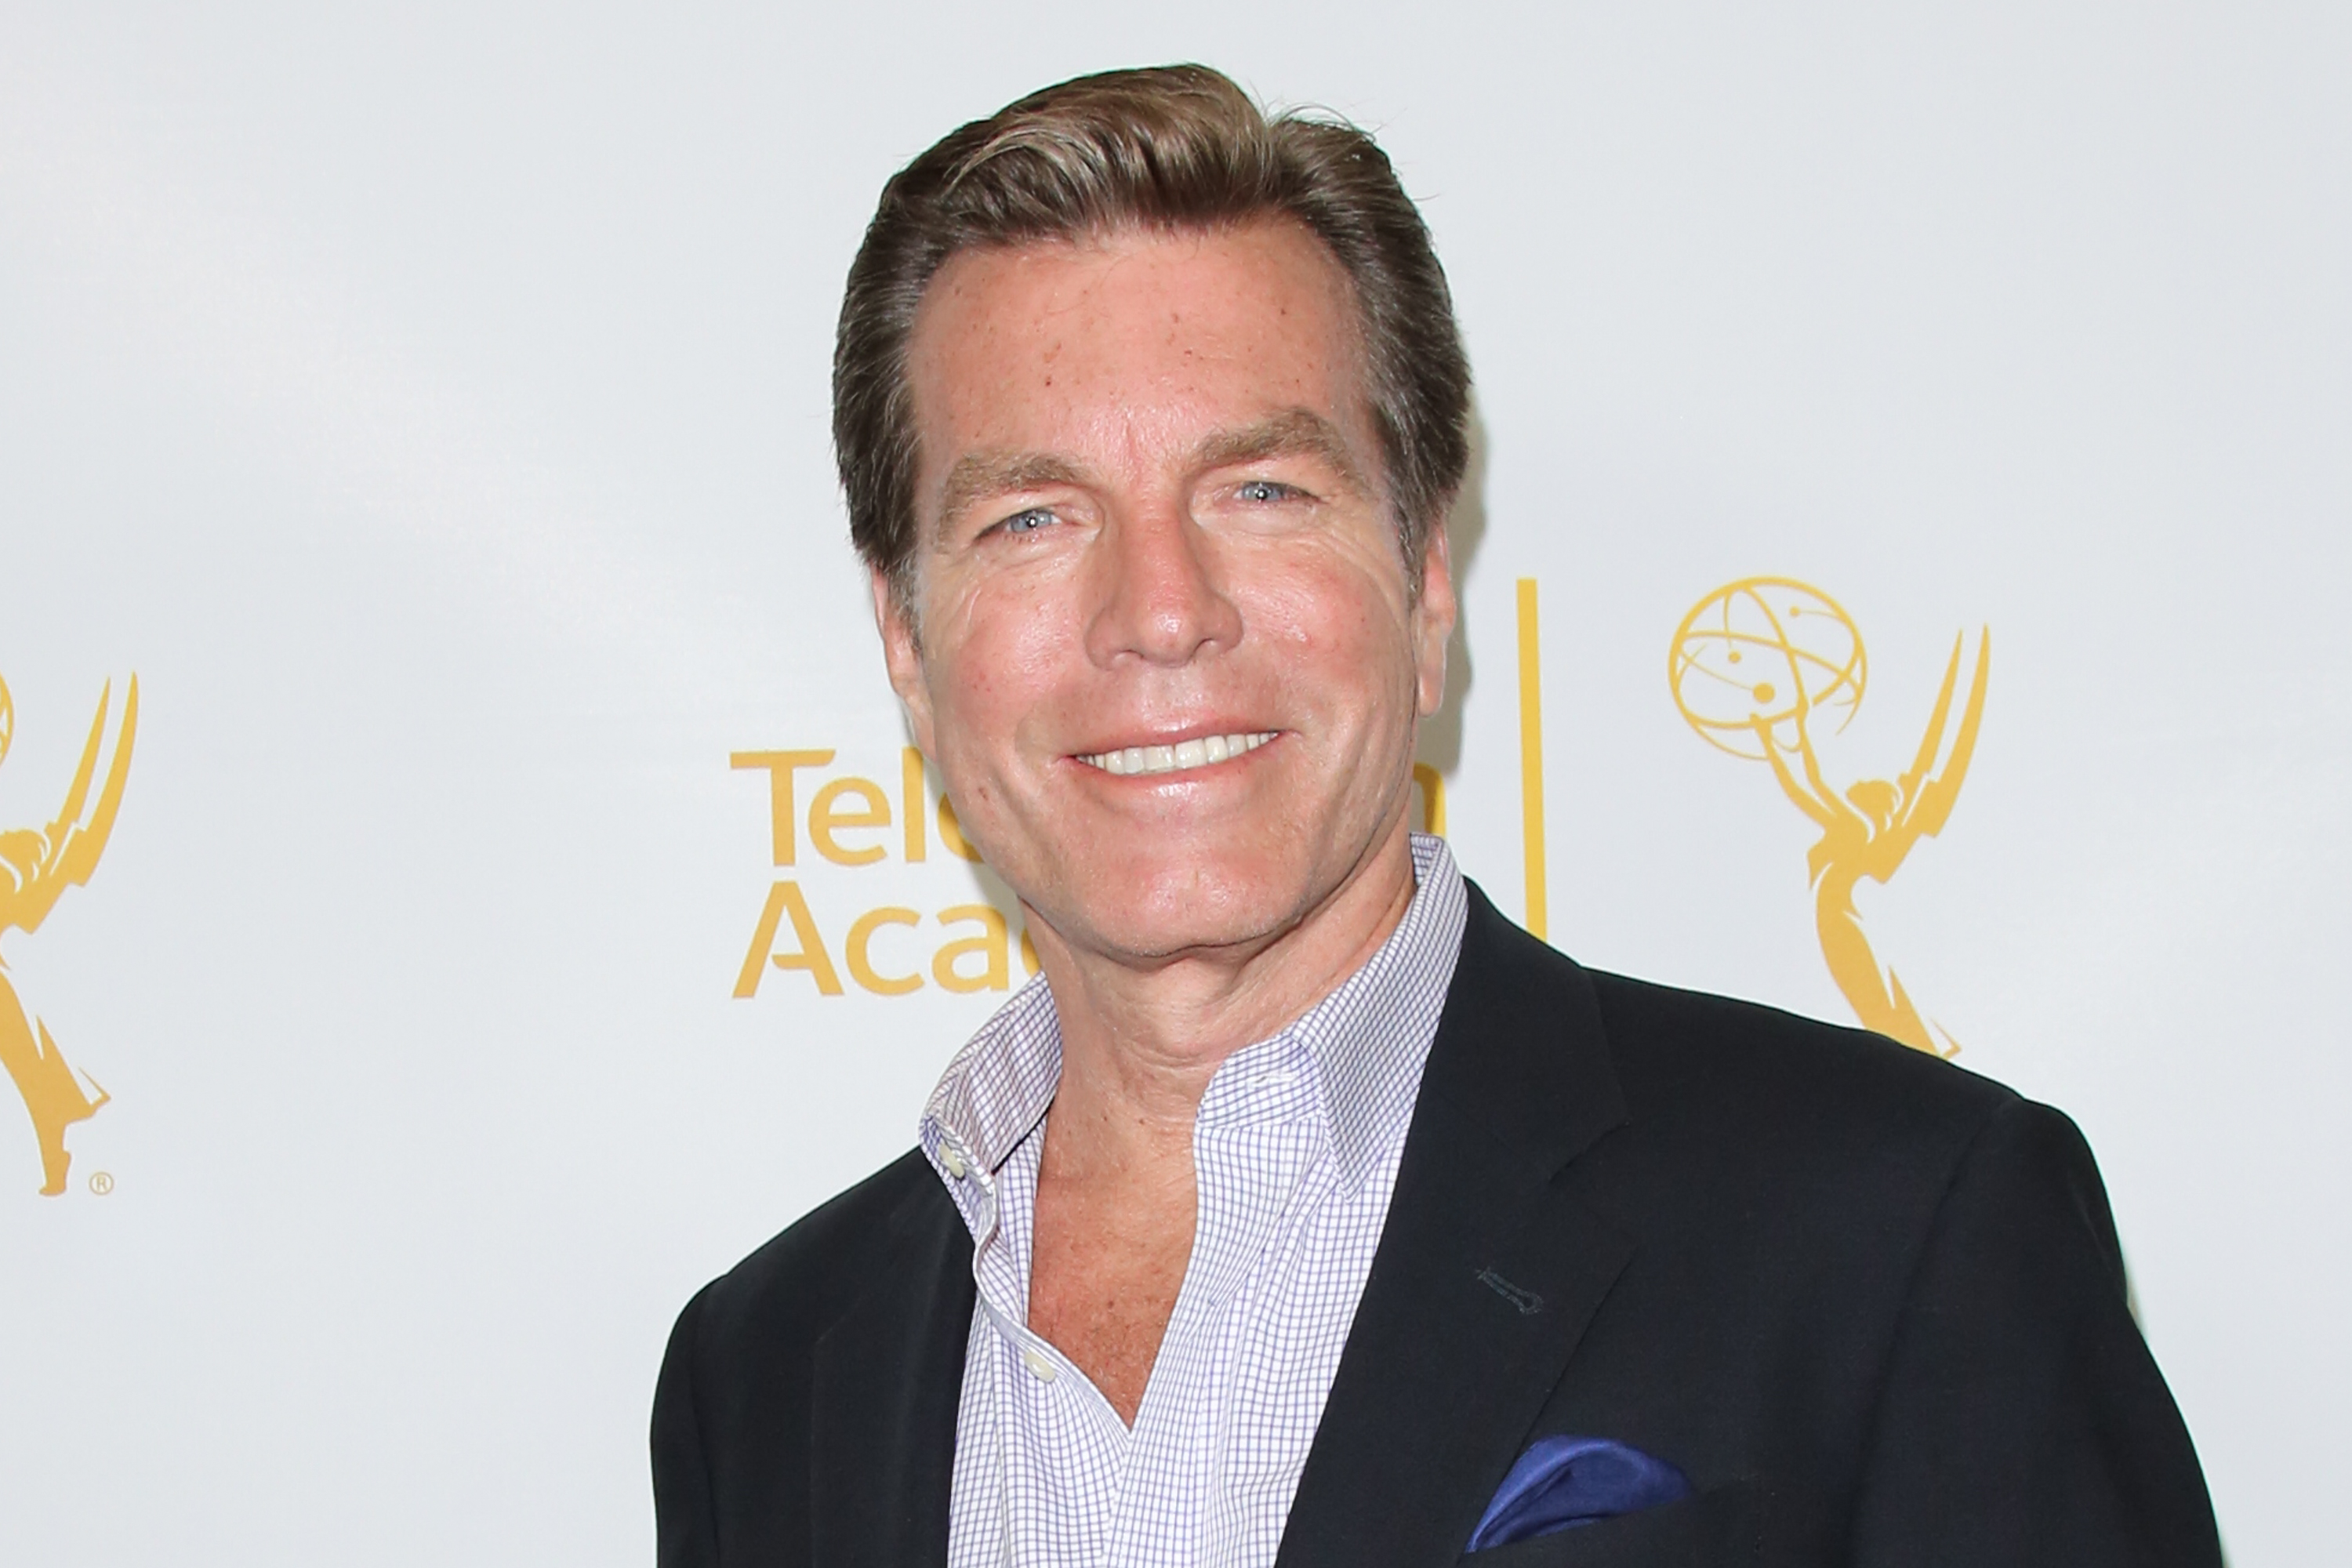 'The Young and the Restless' spoilers reveal Jack Abbott ends his relationship with Phyllis Summers.